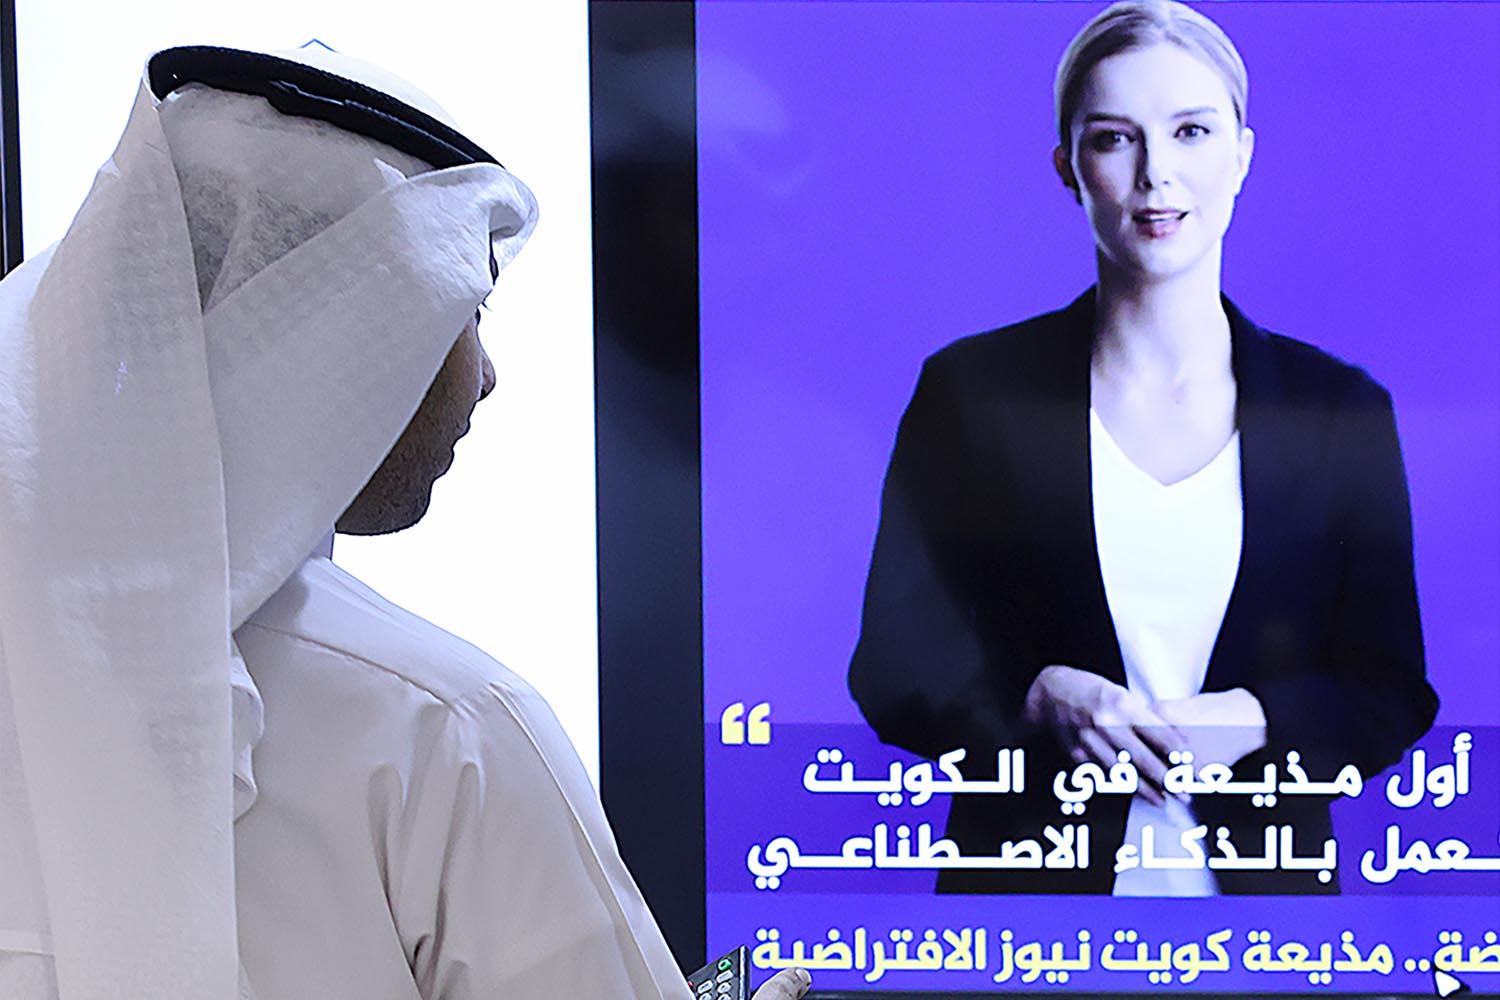 News-presenter-generated-with-AI-appears-in-Kuwait-SPACEBAR-Hero